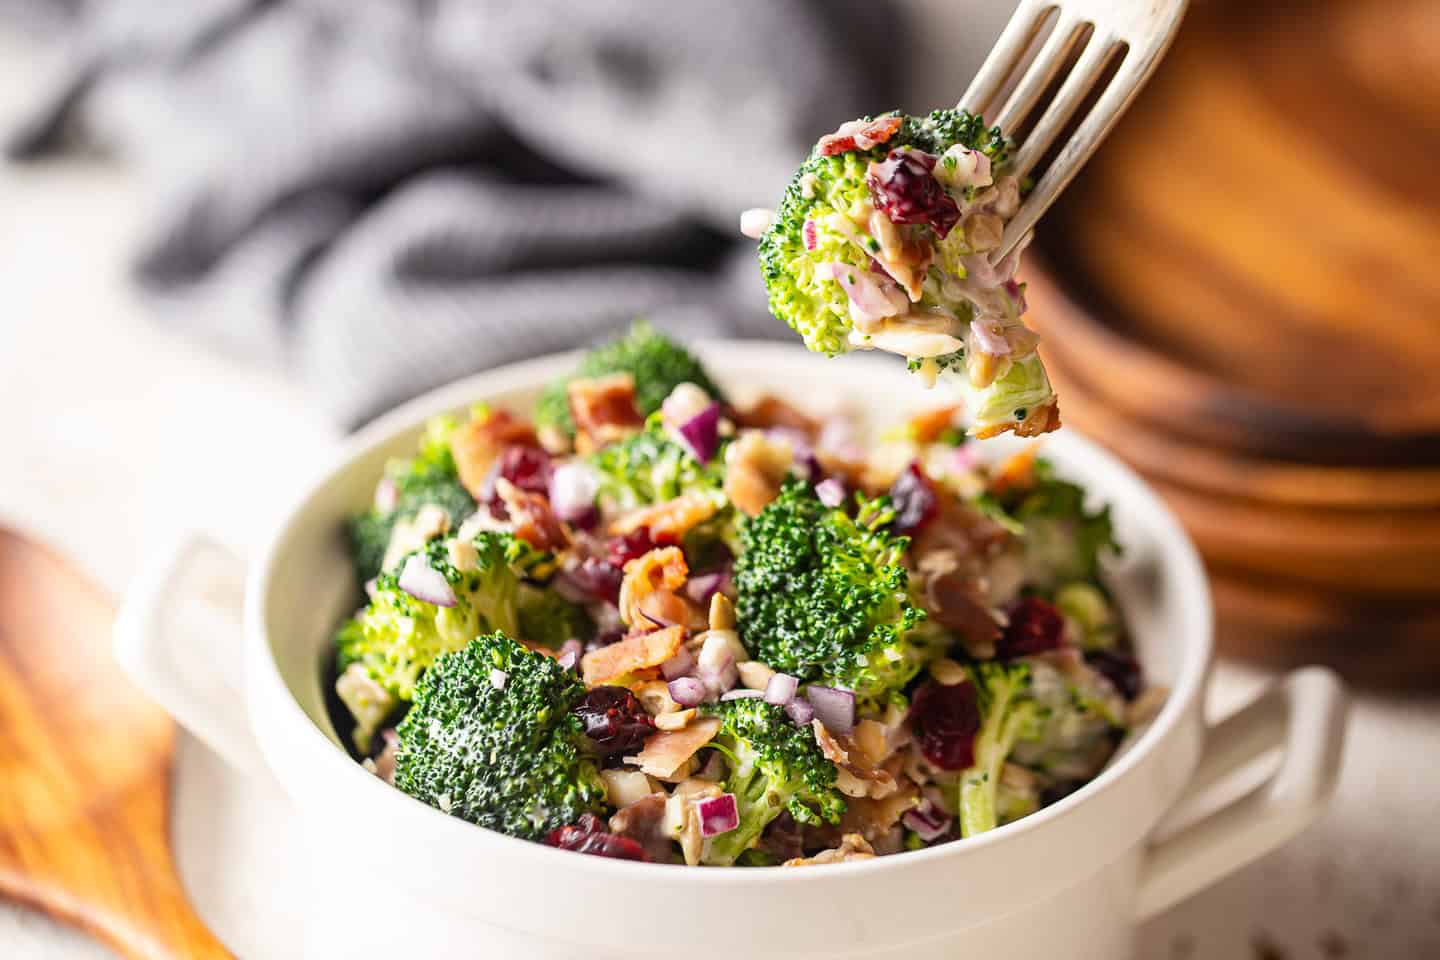 Taking up a forkful of broccoli salad with bacon.